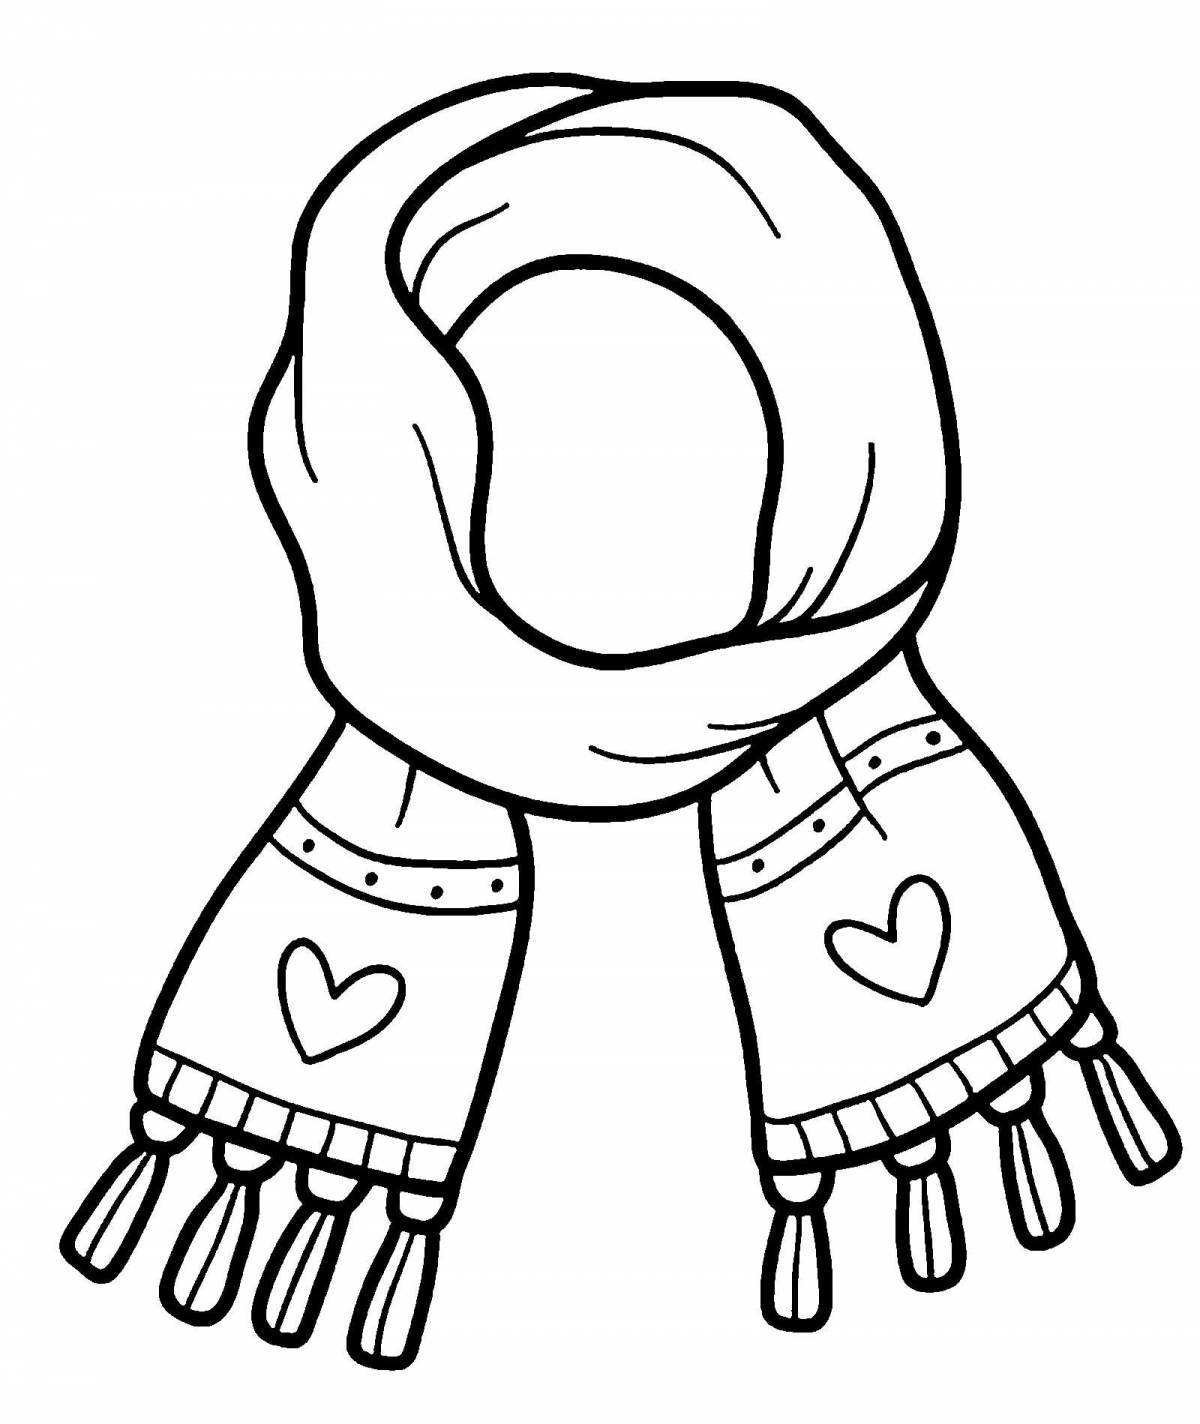 Rainbow scarf coloring page